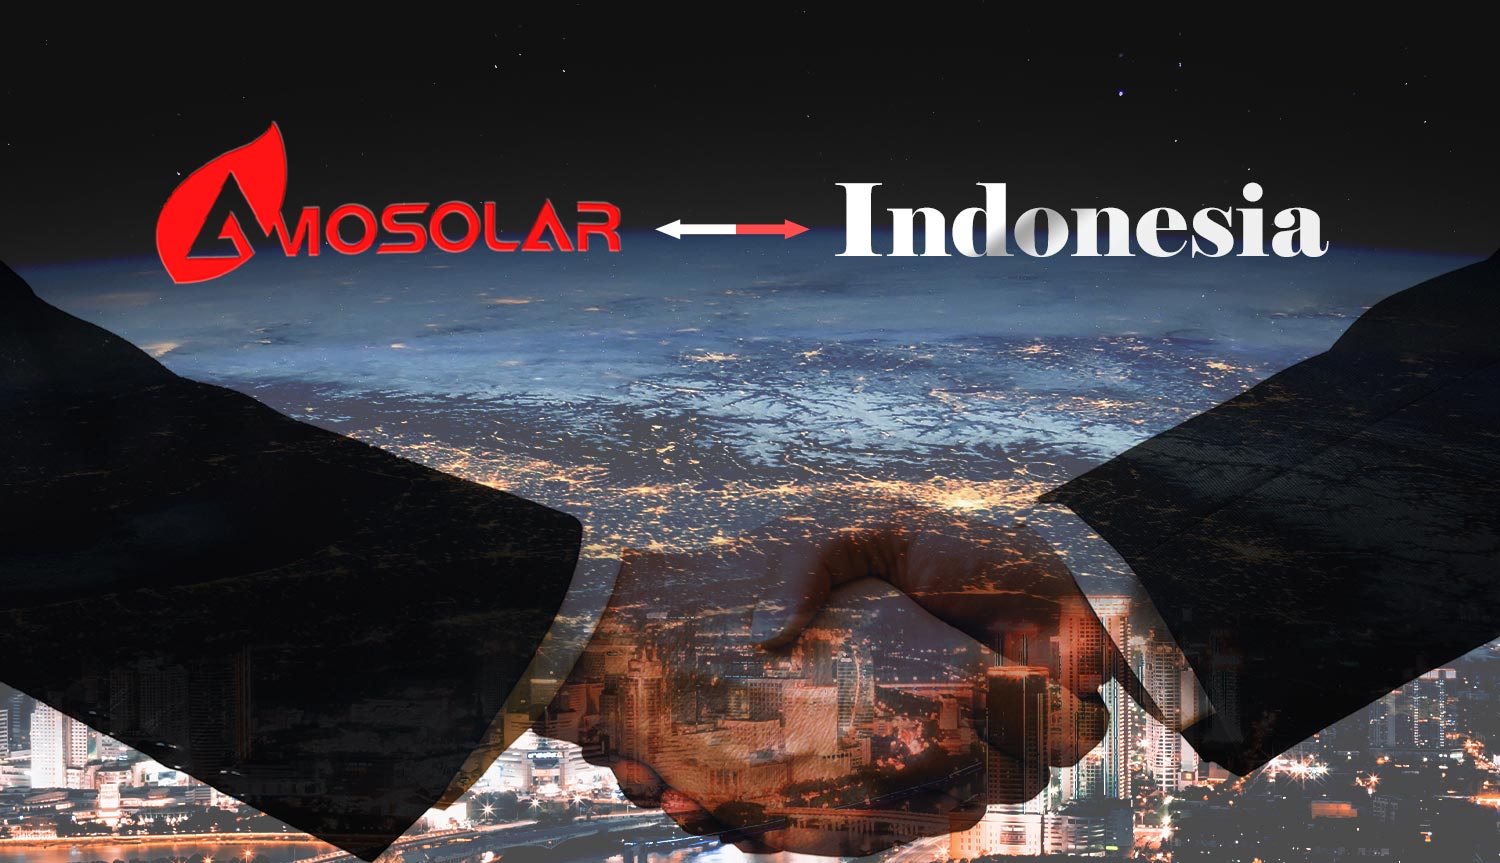 Amosolar trademark has been listed on Intellectual Property in Indonesia.